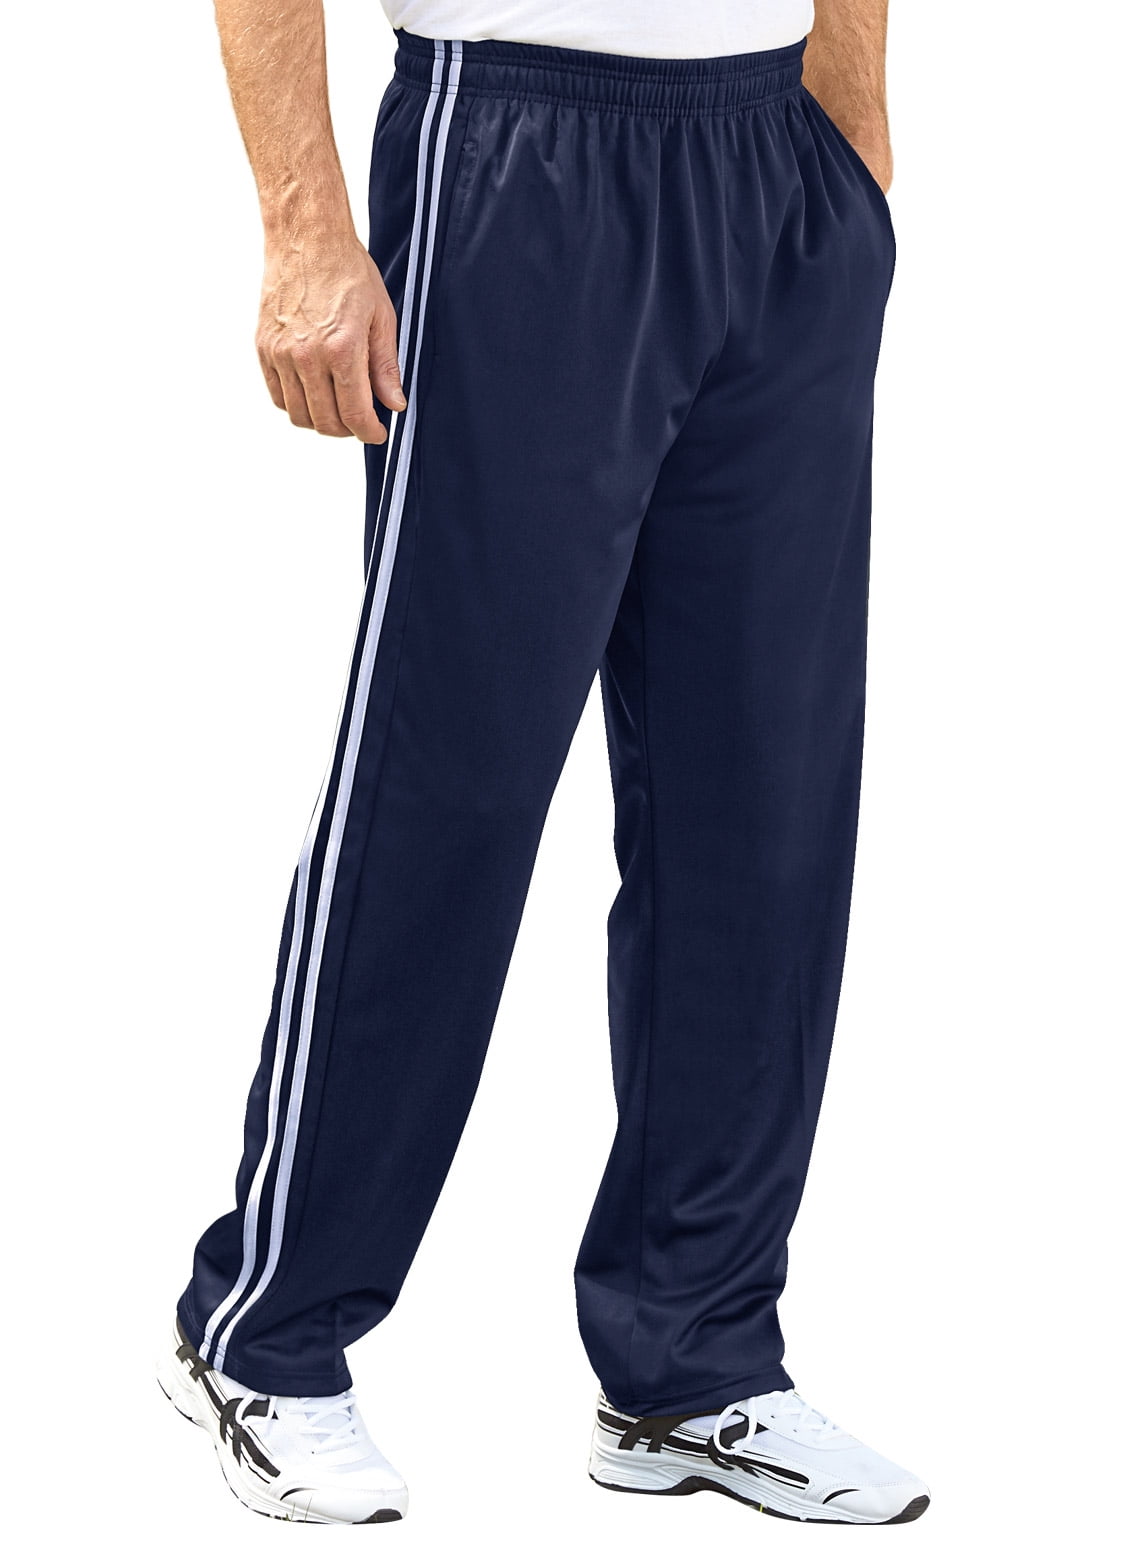 Plus Size Men's Casual Contrast Color Sports Pants For Big Tall